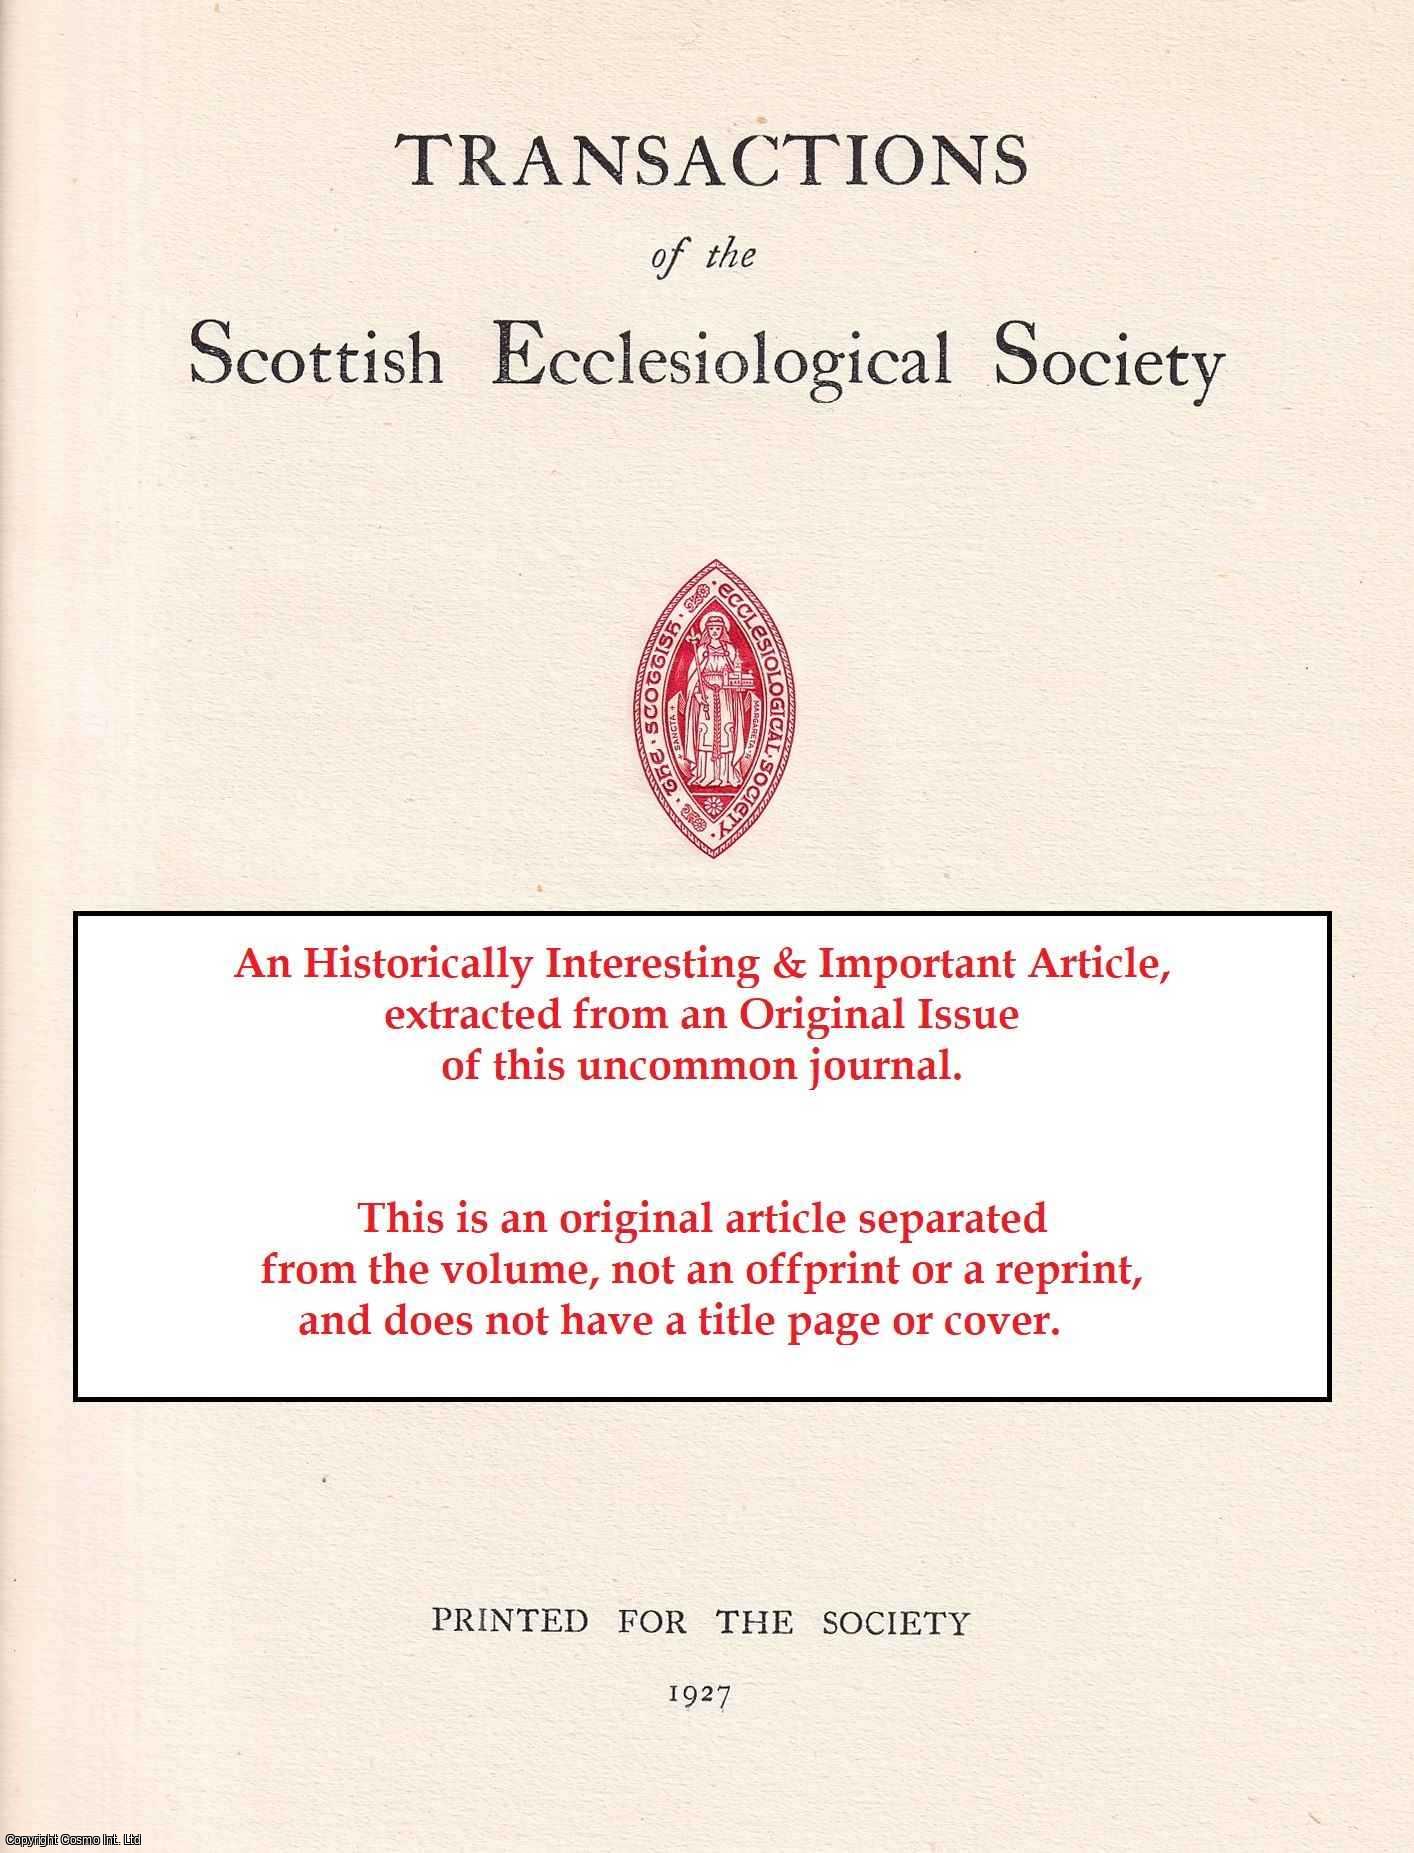 Rev James F. Leishman - Doctor John Michaelson, Minister of Burntisland during the First Episcopacy. An original article from the Transactions of the Scottish Ecclesiological Society, 1924.